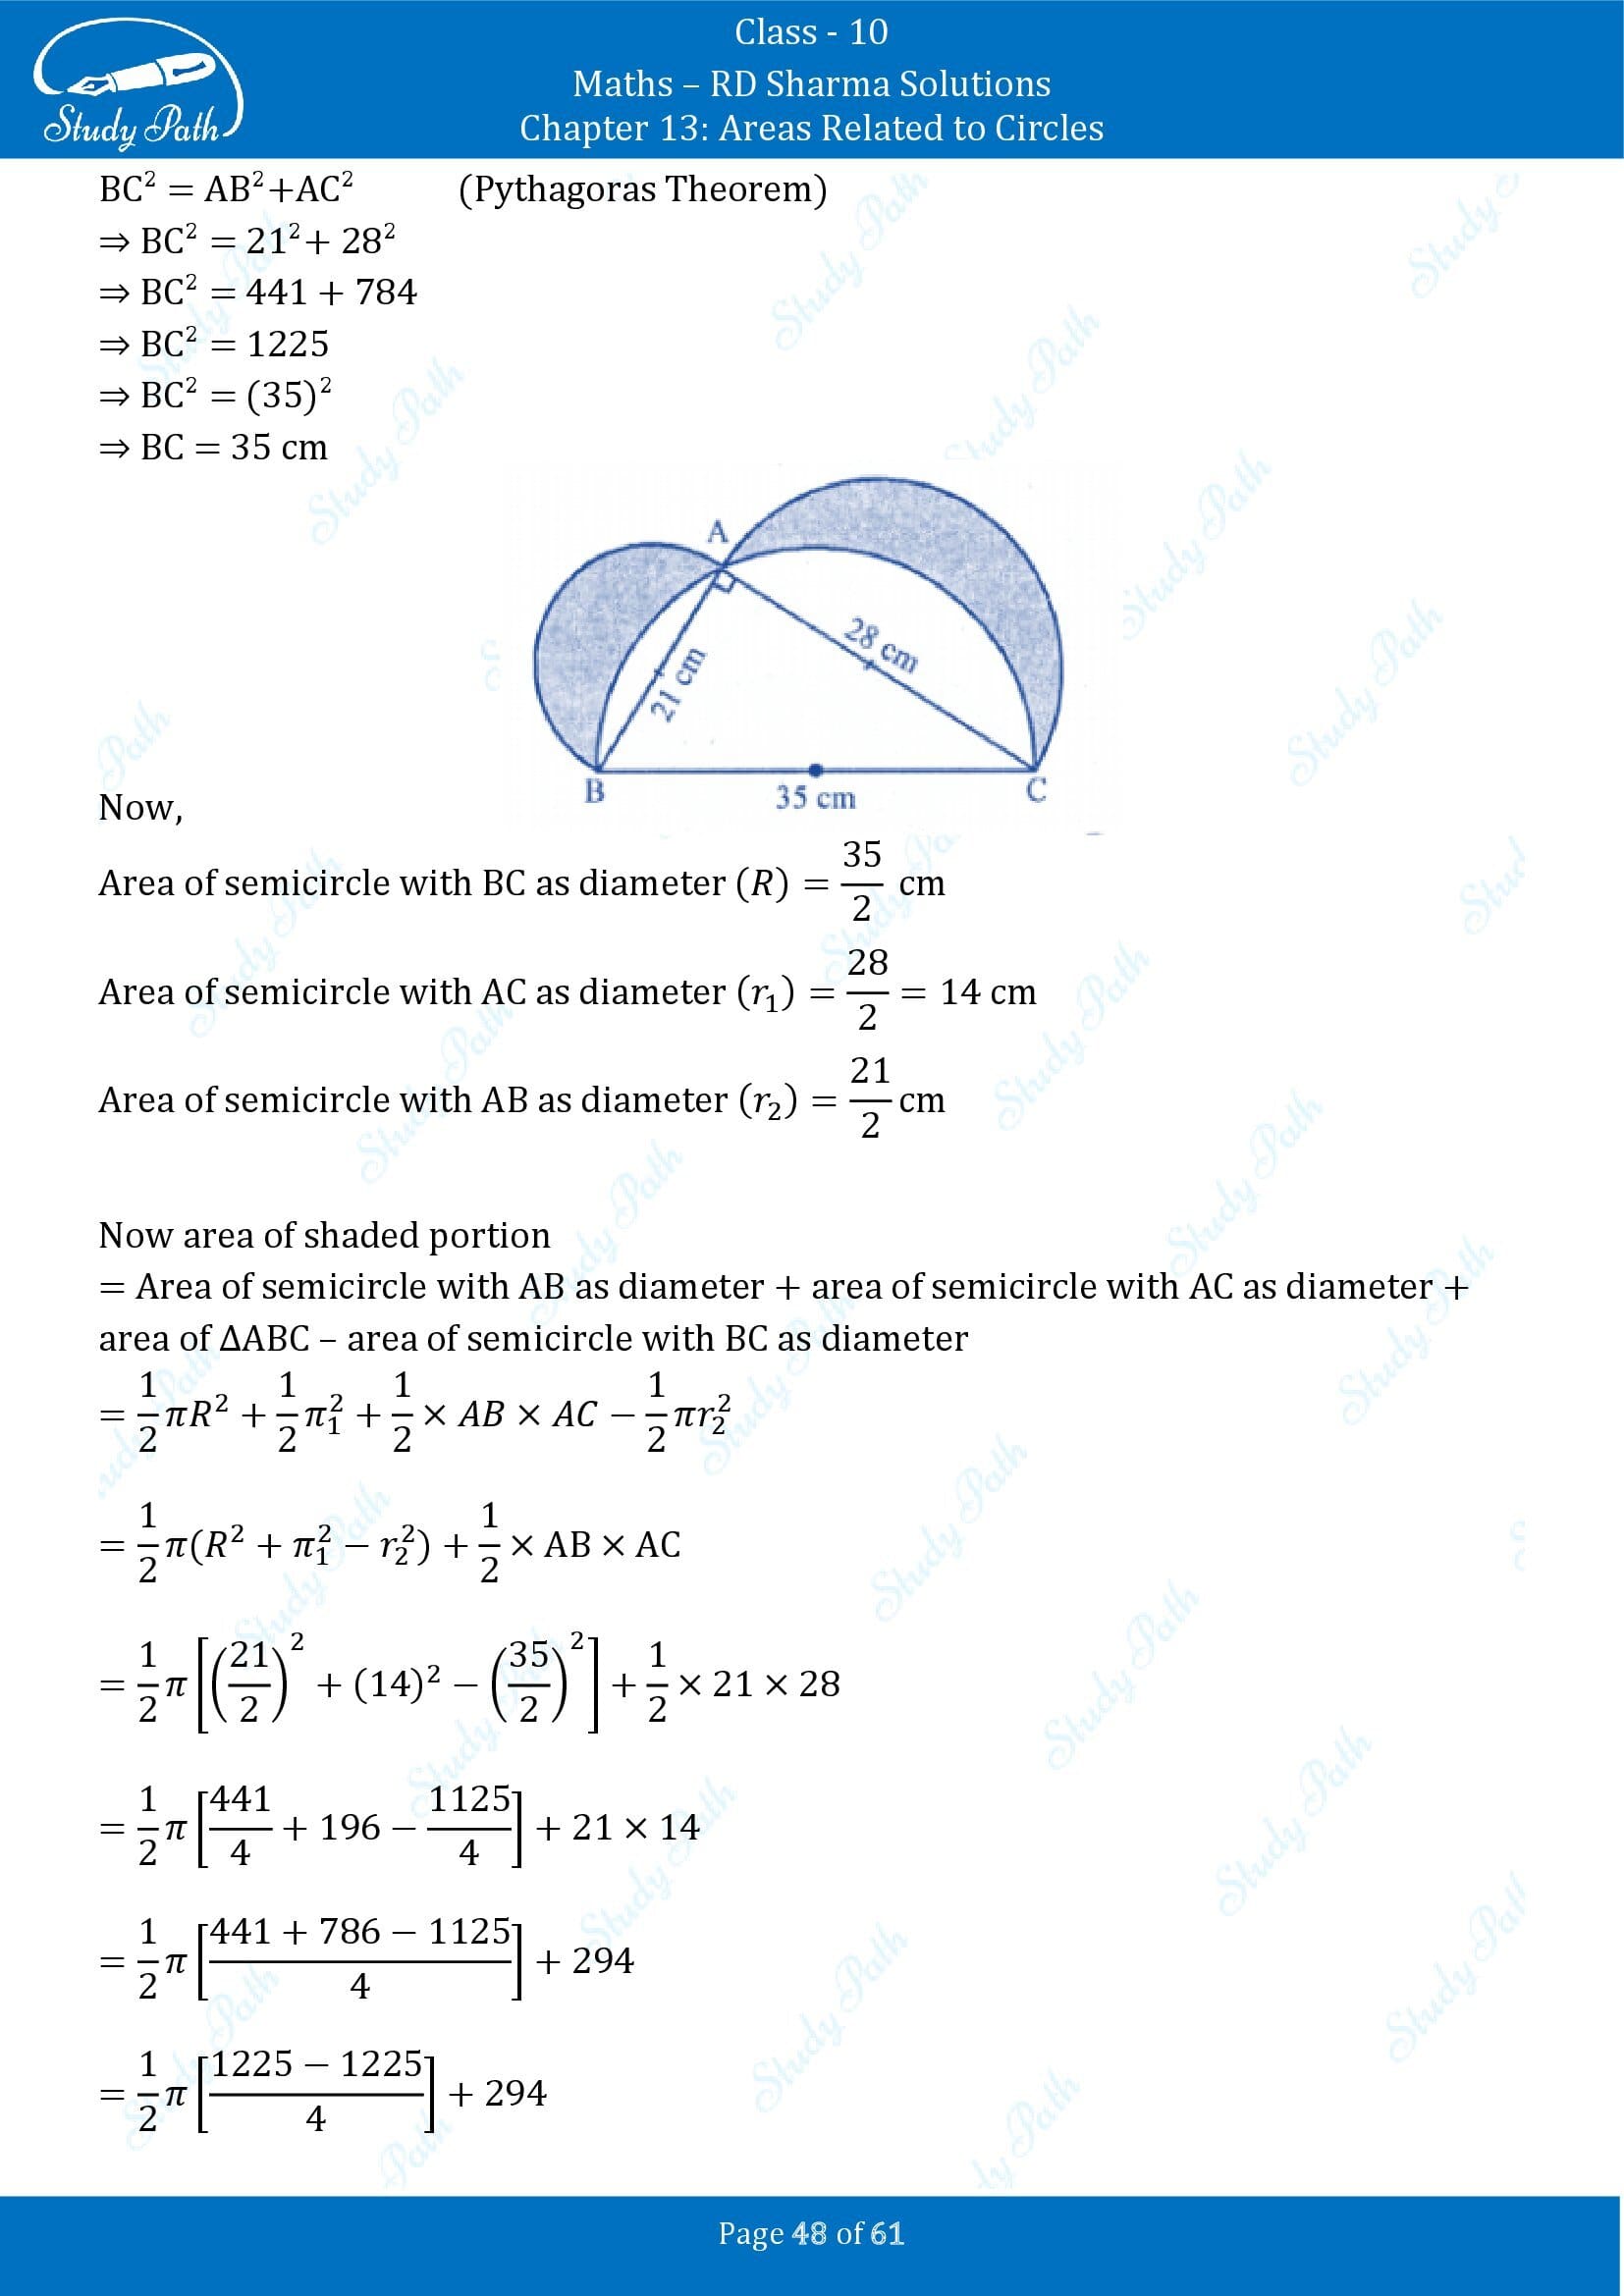 RD Sharma Solutions Class 10 Chapter 13 Areas Related to Circles Exercise 13.4 00048